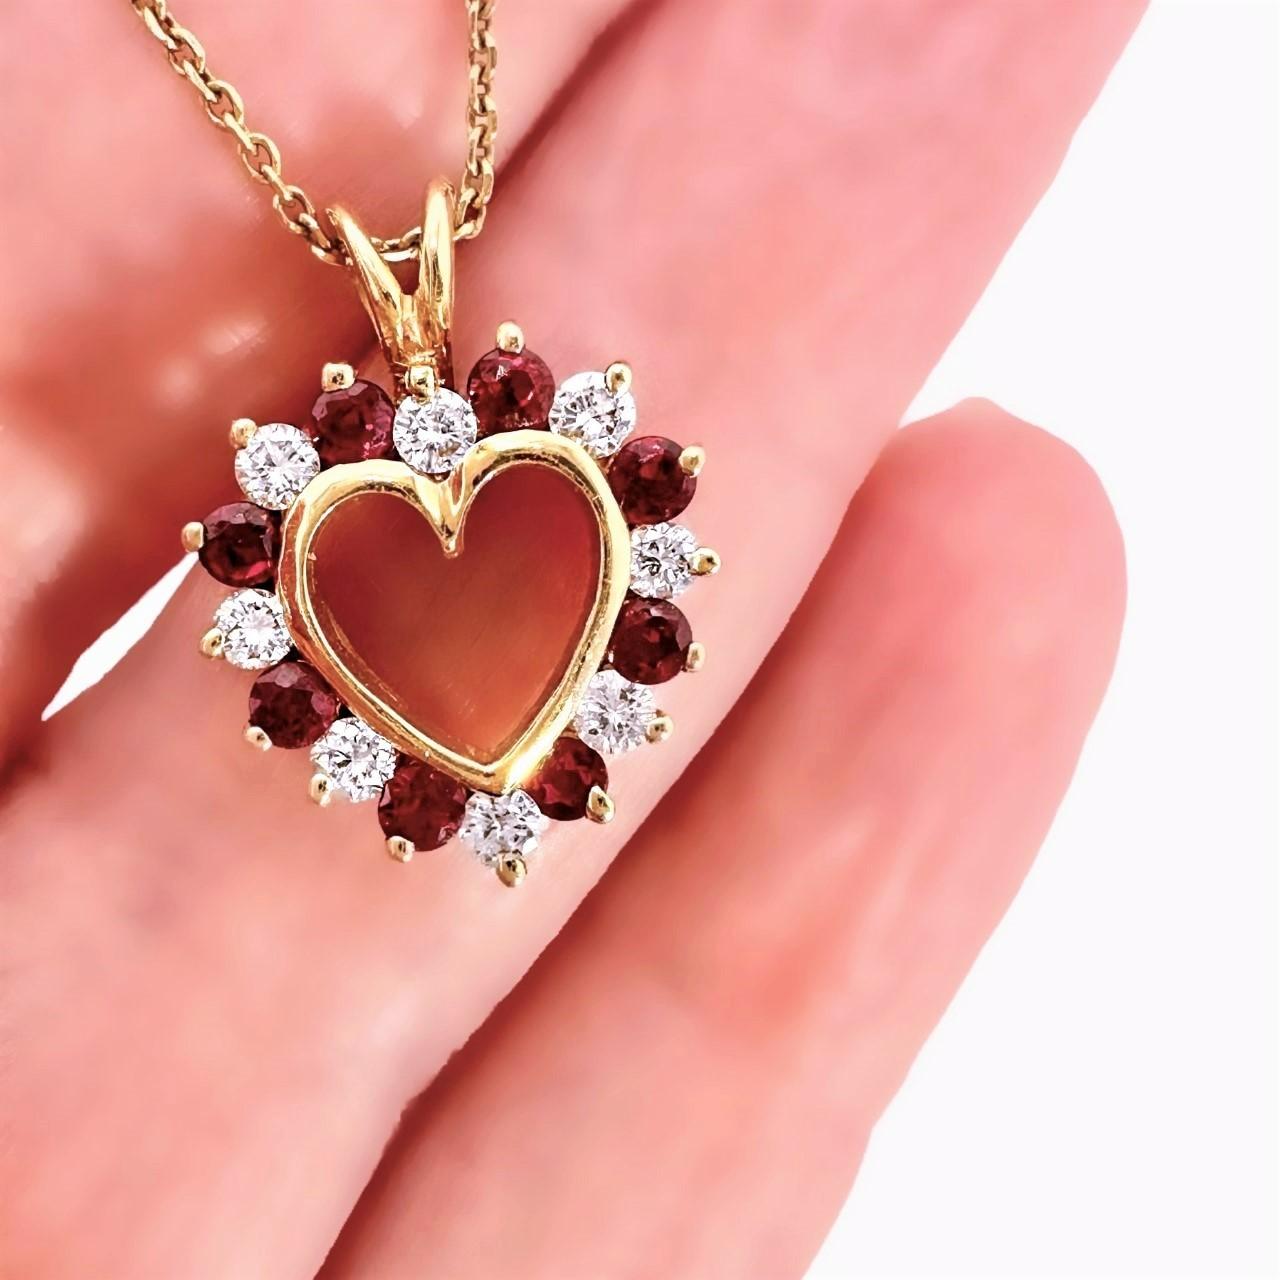 Petite Modern Gold Heart Pendant with Rubies and Diamonds In Good Condition For Sale In Palm Beach, FL